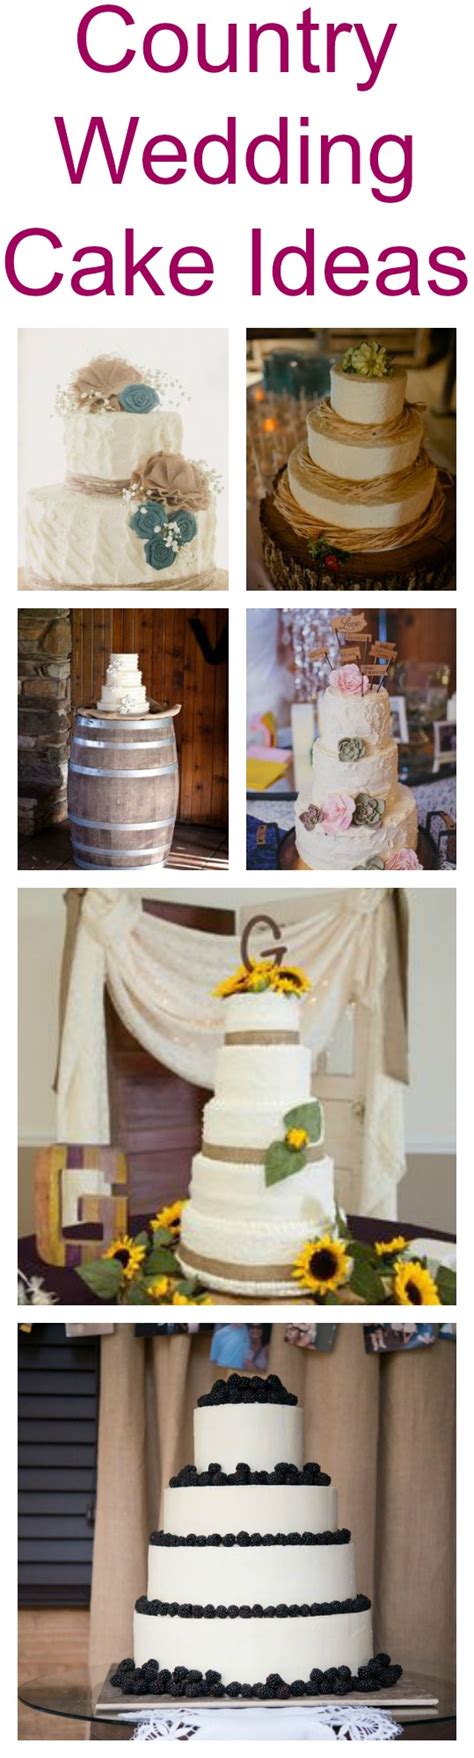 Browse through our inspiration gallery and get ready to sketch out rustic wedding ideas 'til the cows come home. Country Wedding Cake Ideas - Rustic Wedding Chic